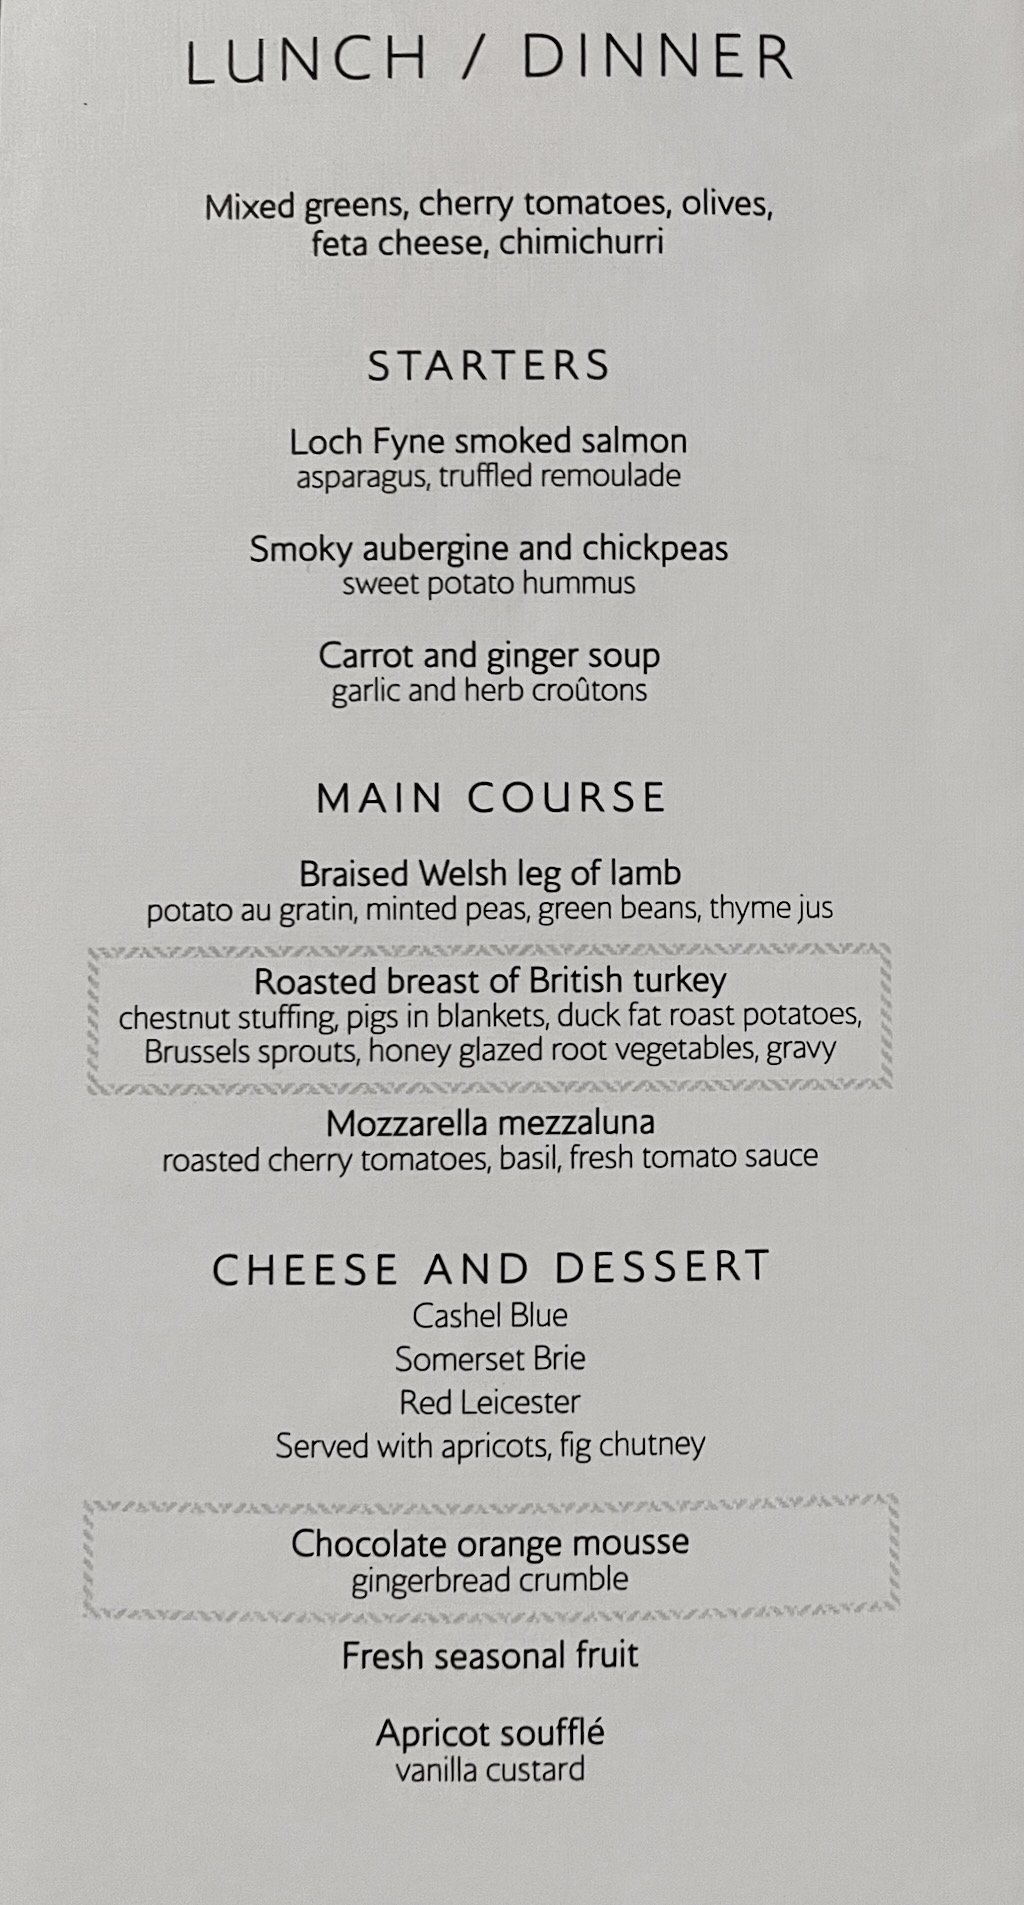 Dinner menu showing starters, mains, and cheese or desserts